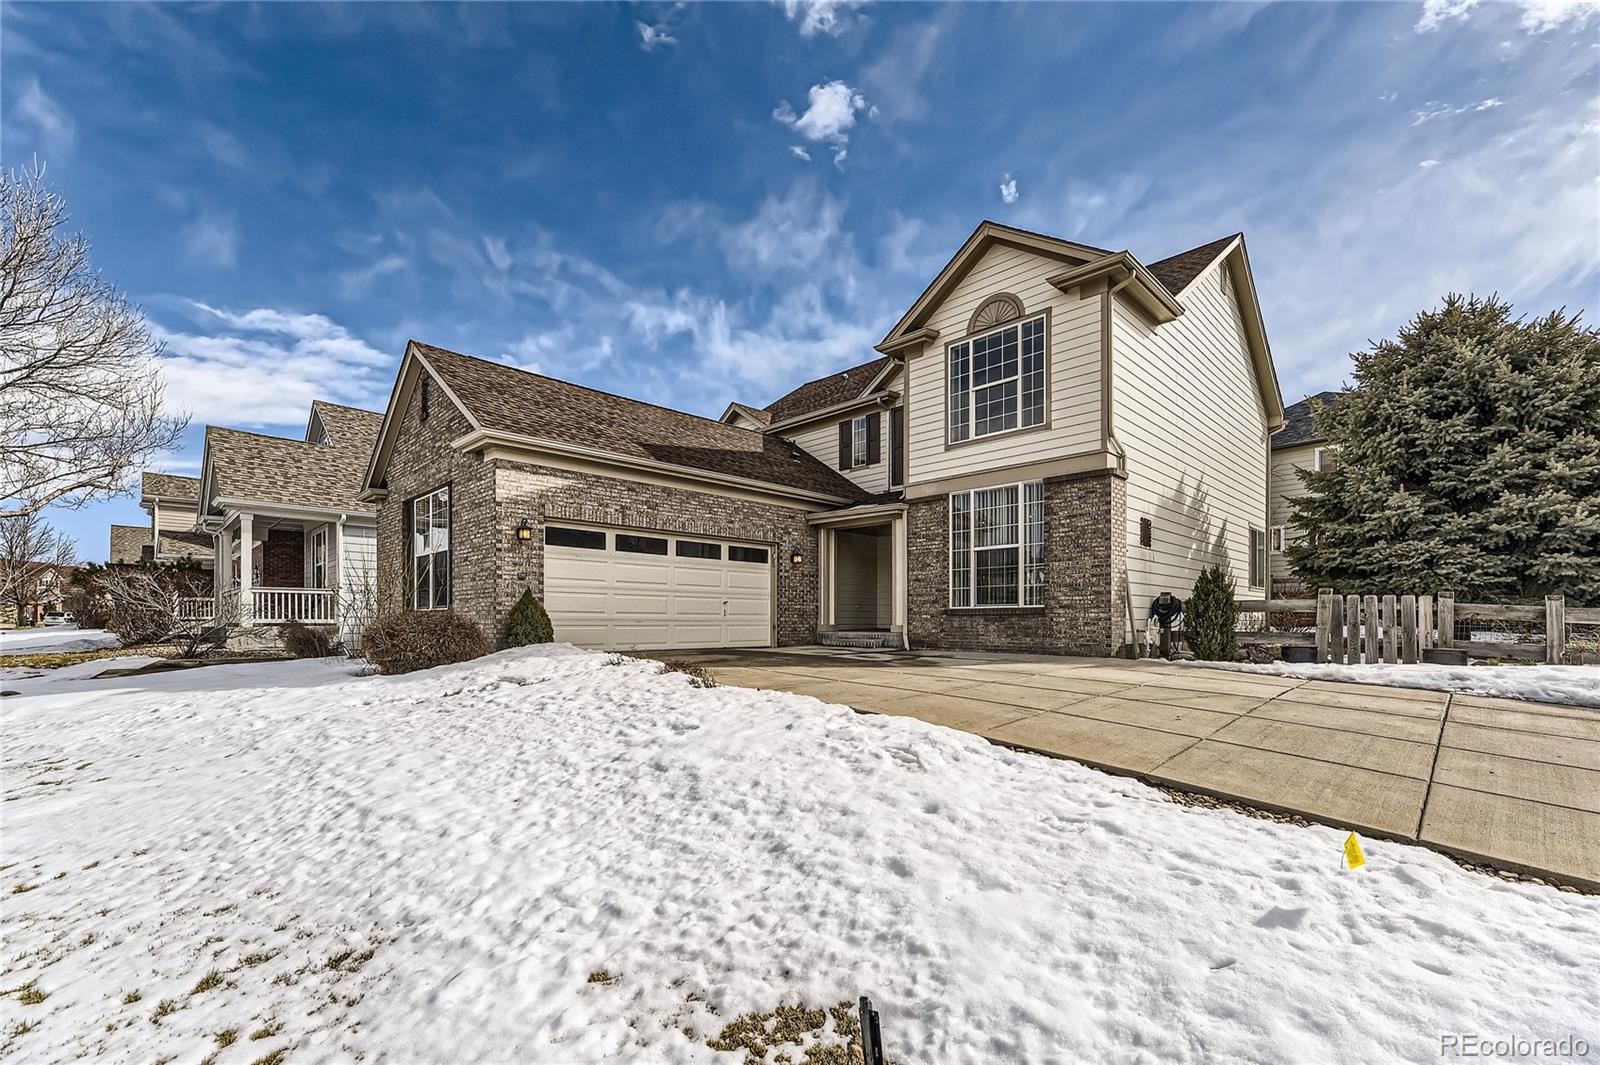 22560 E River Chase Way, parker MLS: 6899622 Beds: 5 Baths: 4 Price: $669,900